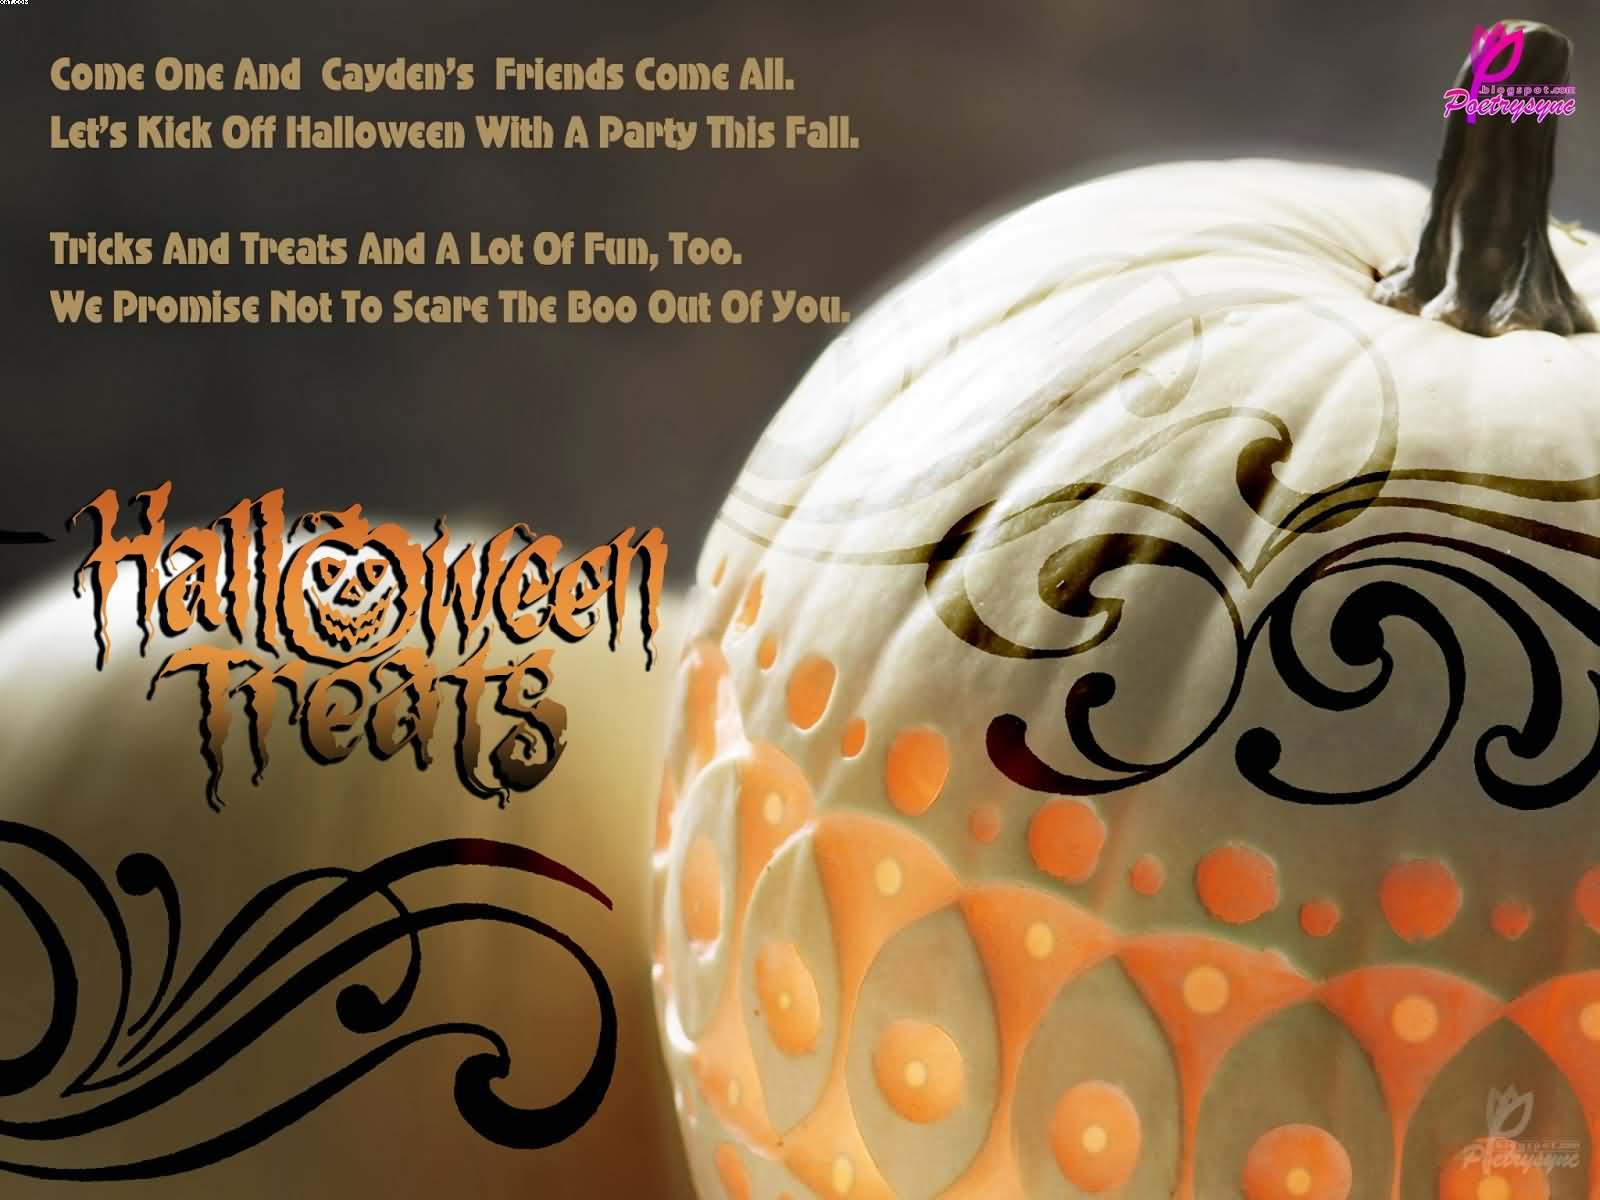 Lets kick off Halloween with a party this fall Halloween Treats wallpaper